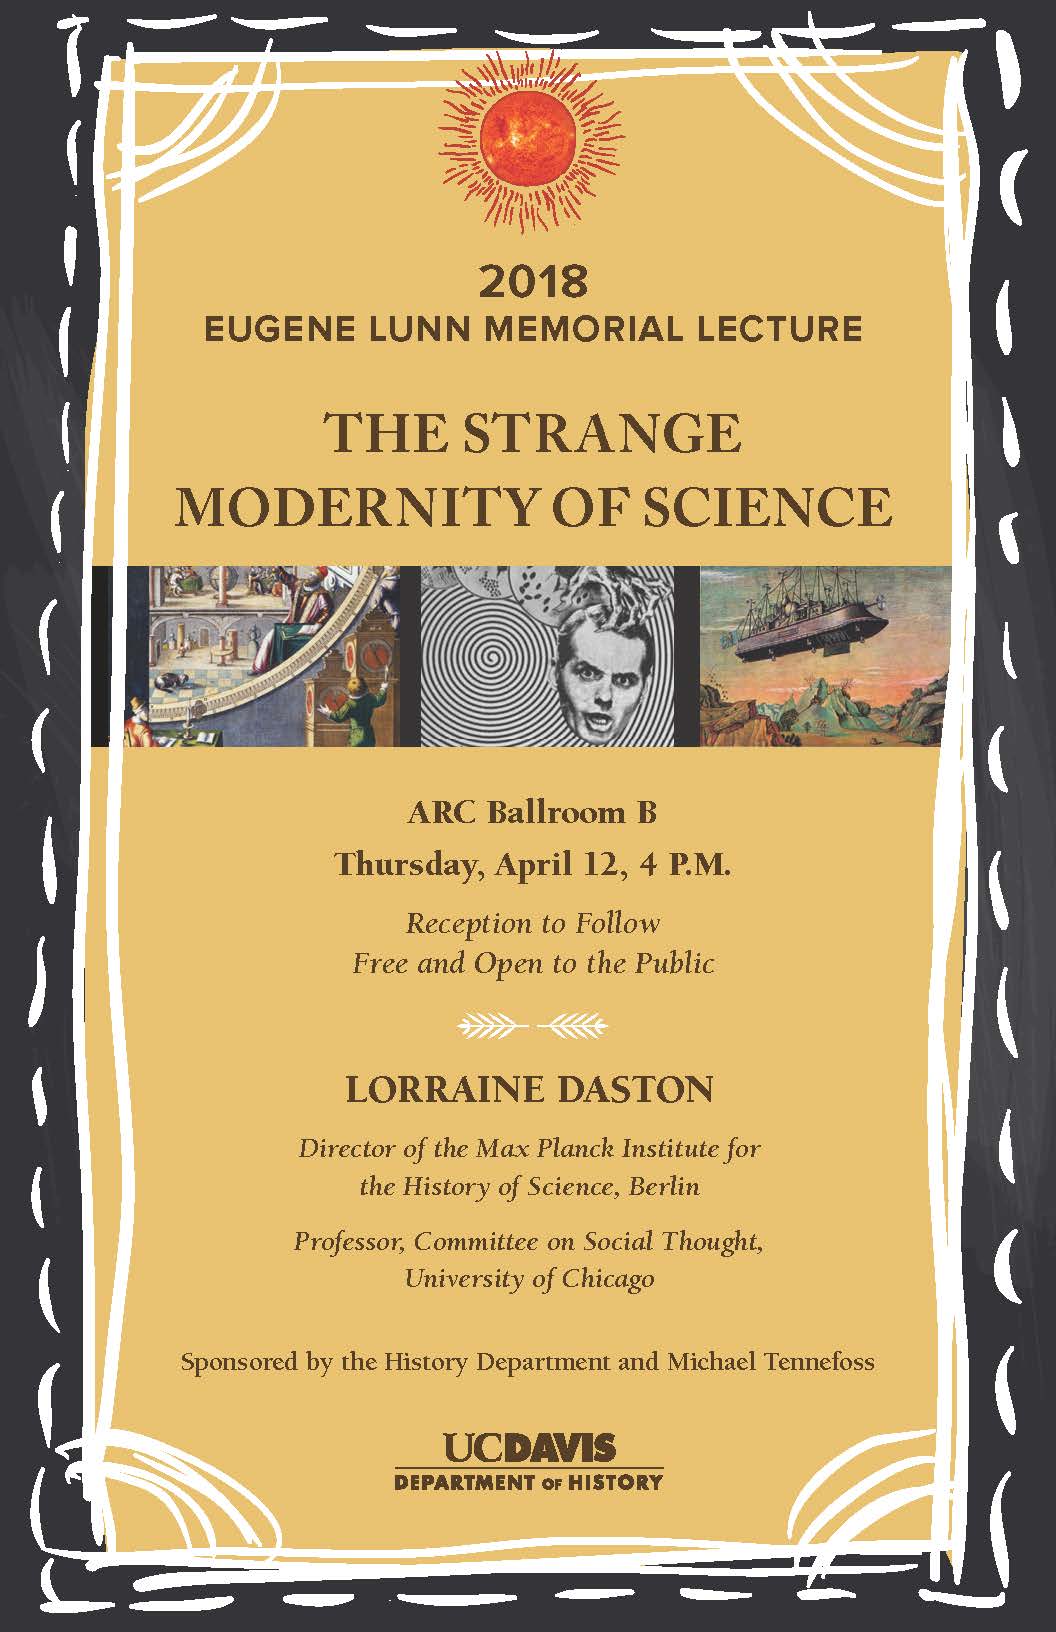 Poster for 2018 Lunn Lecture by Lorraine Daston on "The Strange Modernity of Science" 